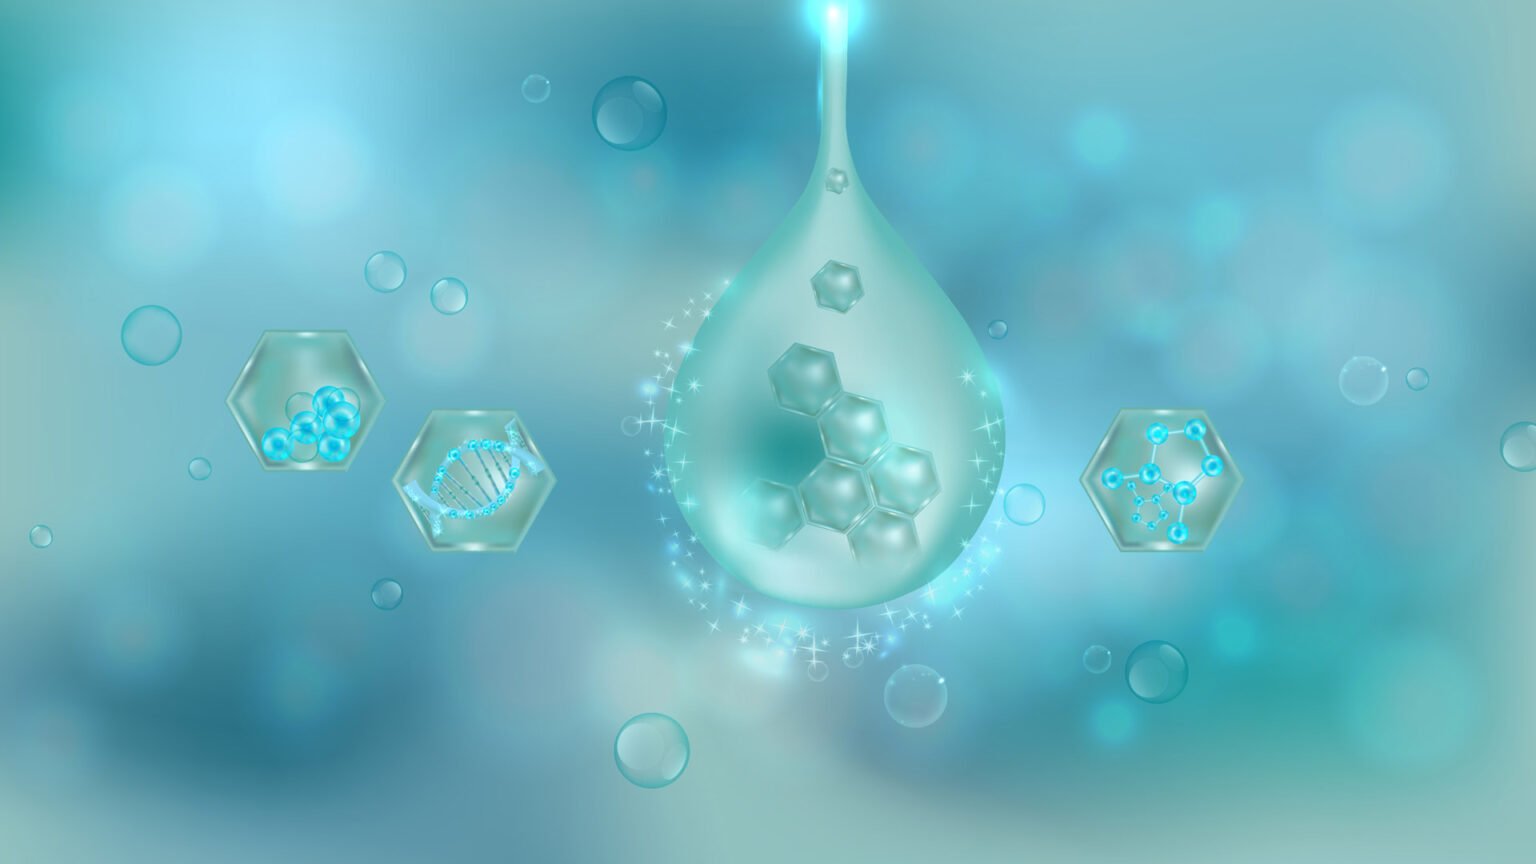 Shimmering turquoise molecular elements floating in a purified dreamscape.